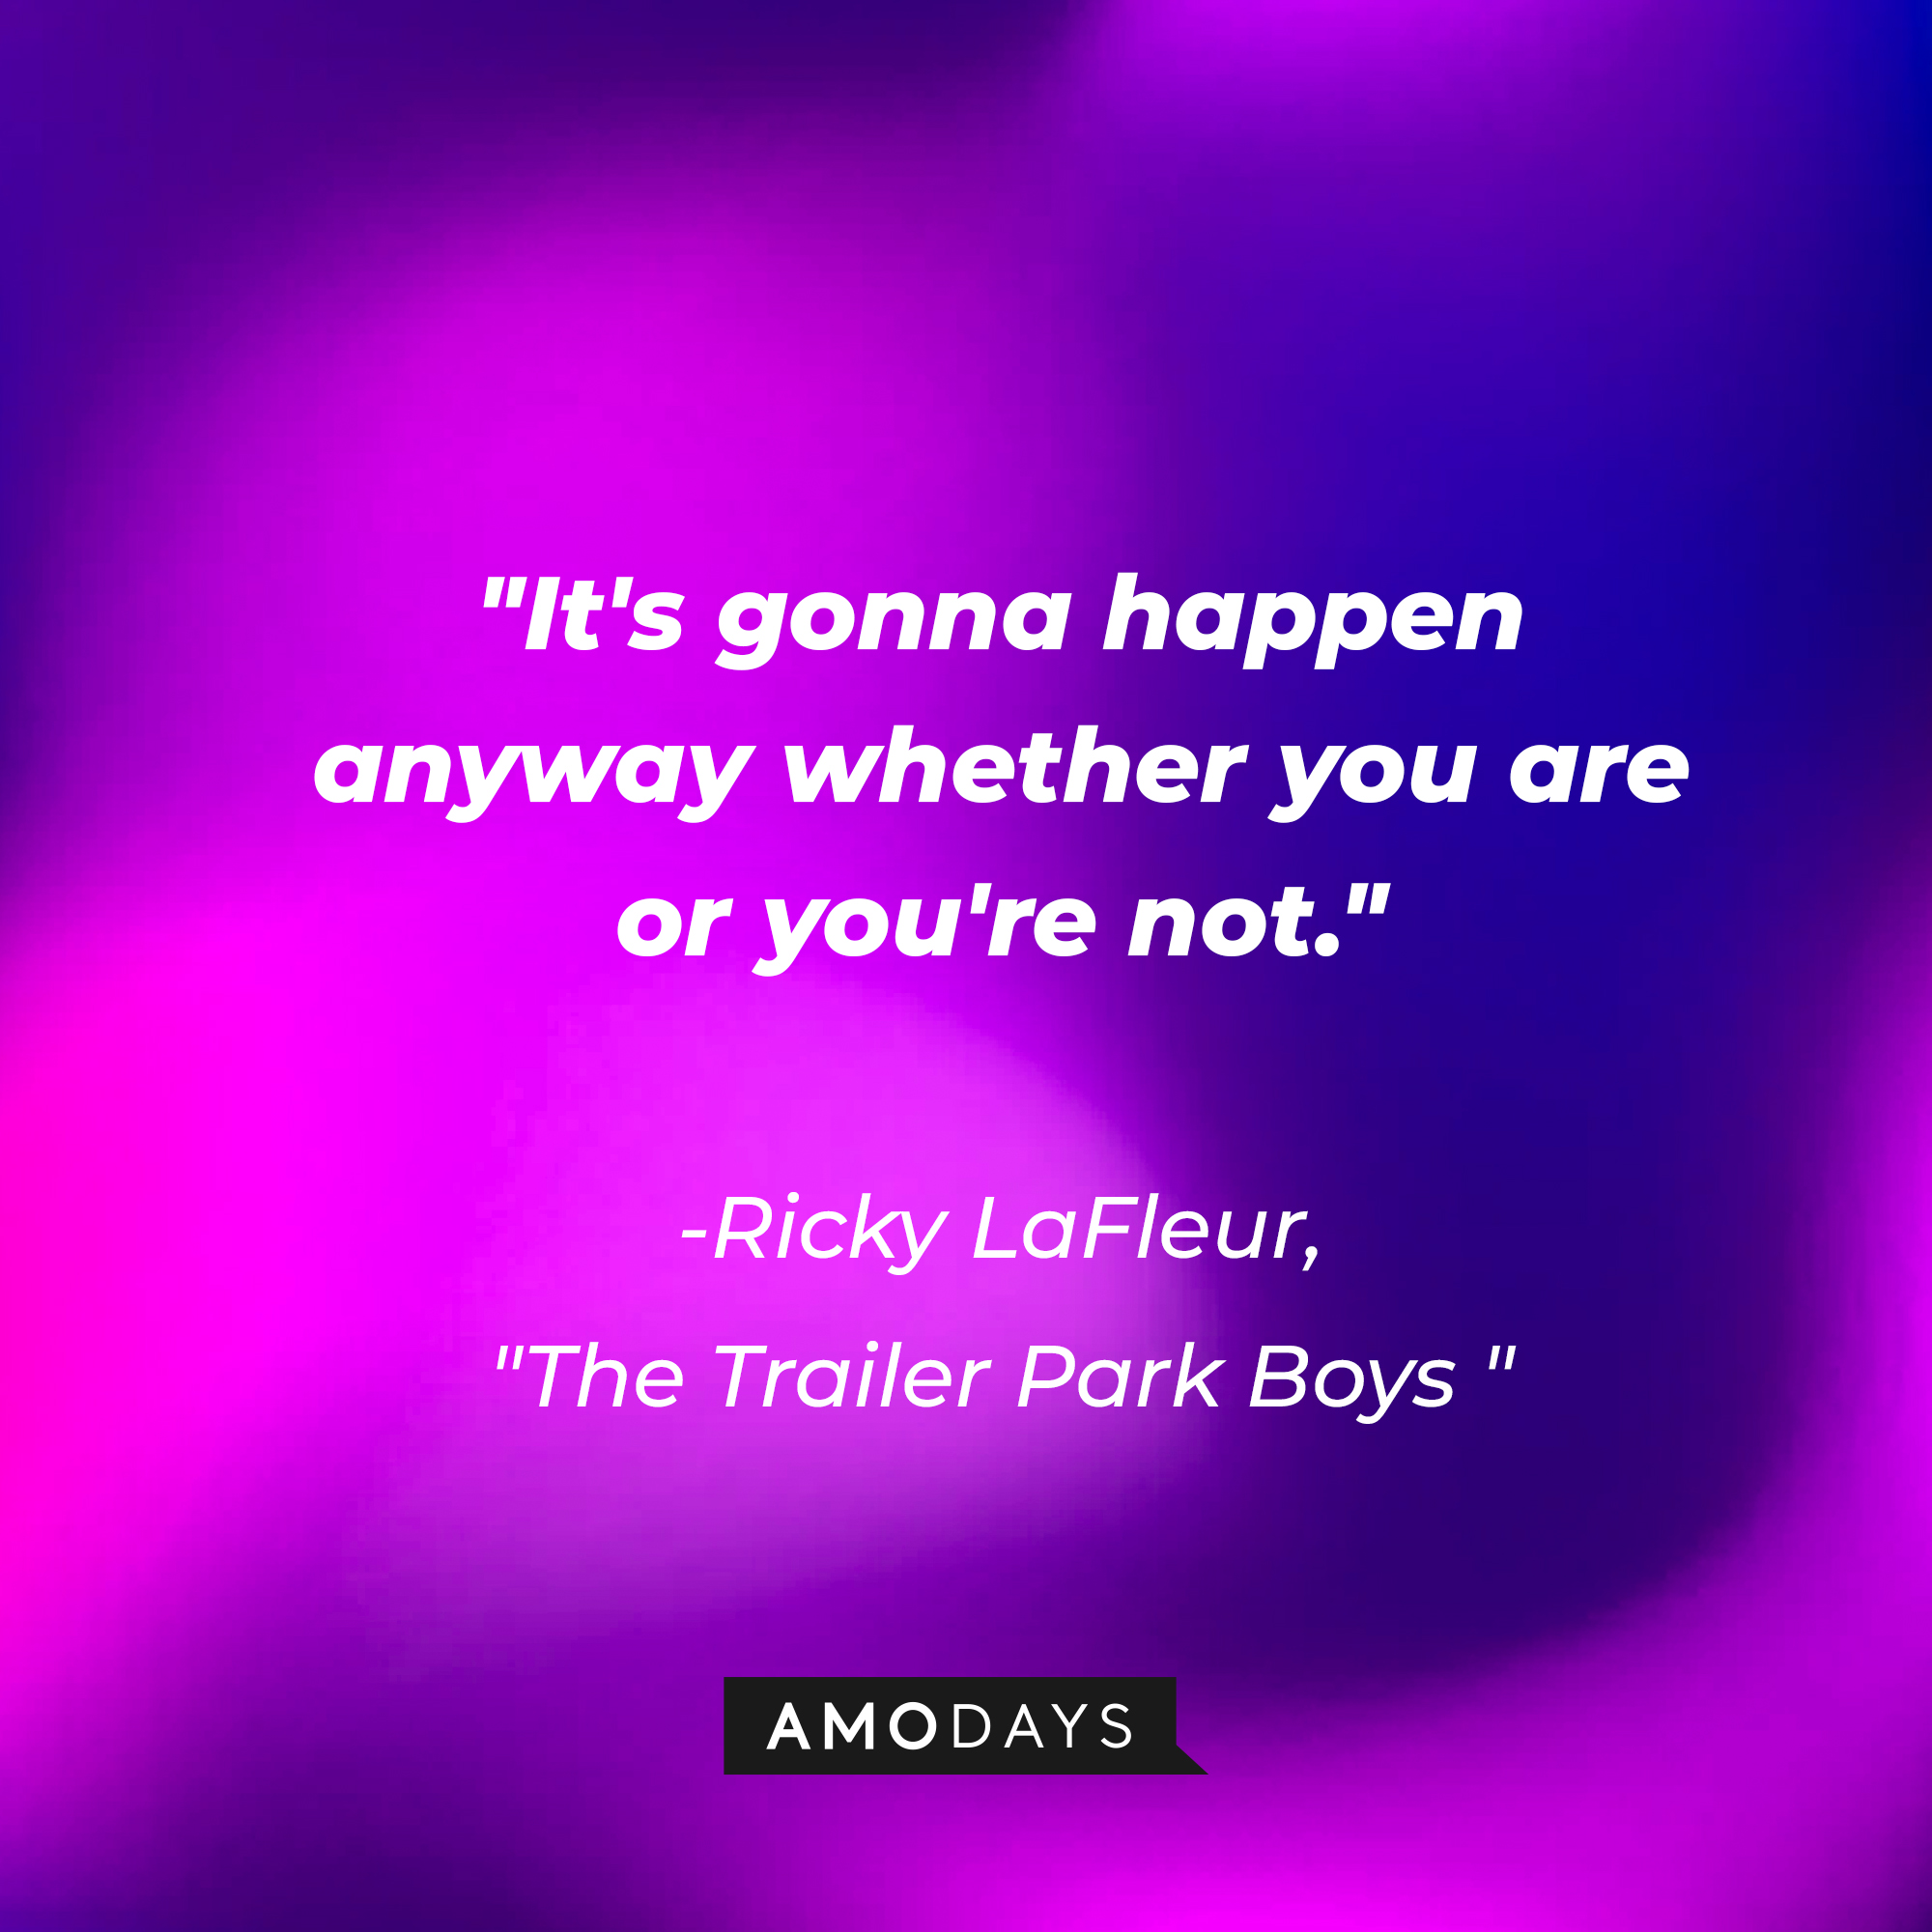 Ricky LaFleur with his quote: "It's gonna happen anyway whether you are or you're not." | Source: AmoDays